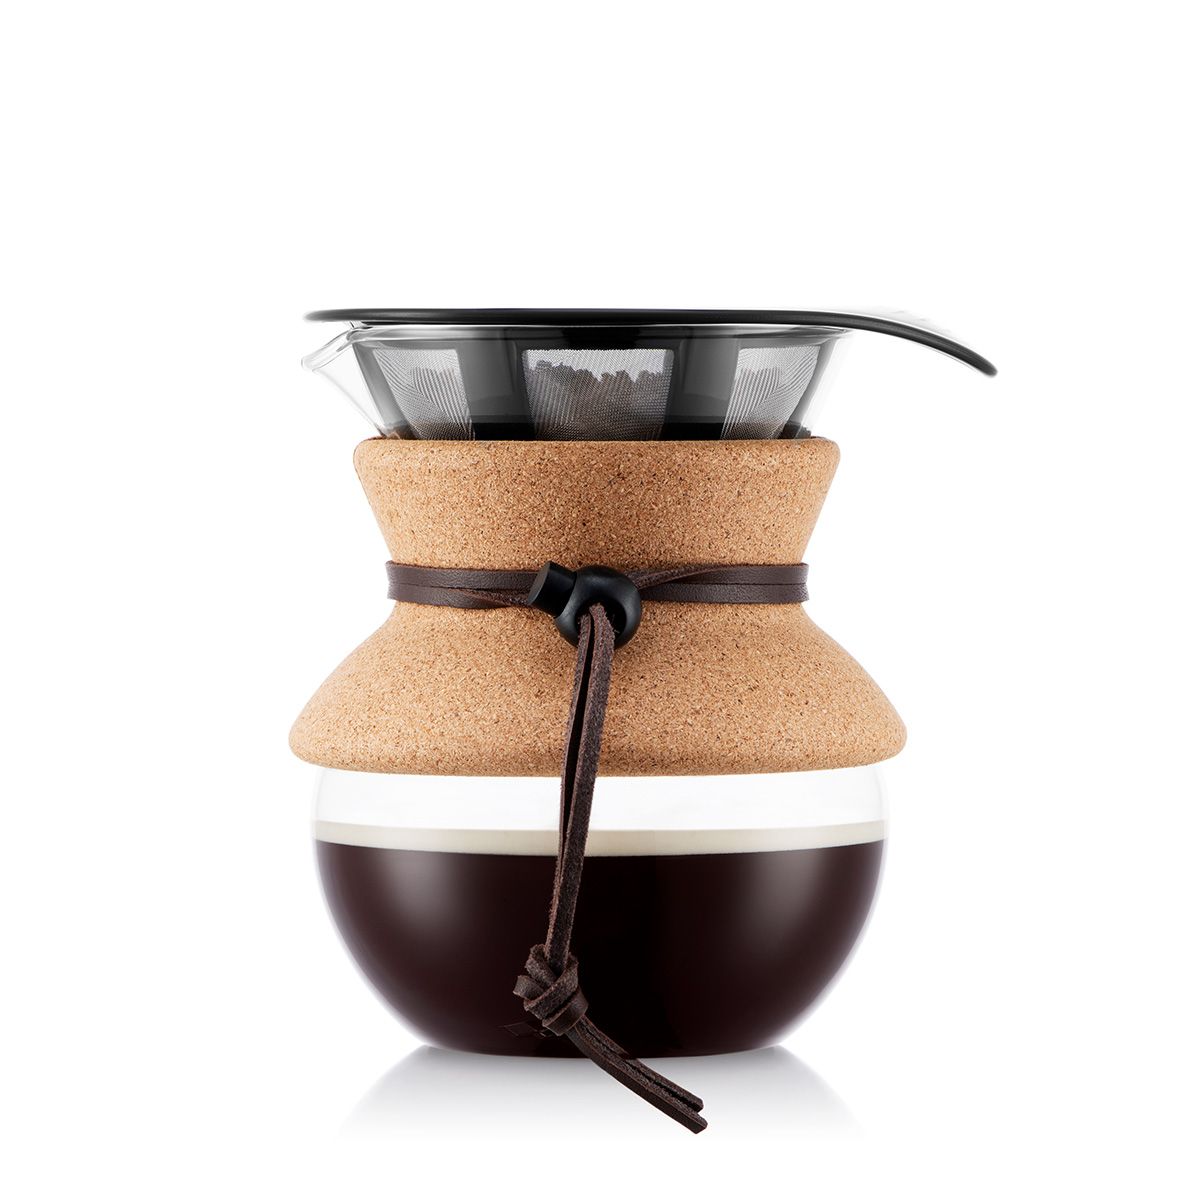 A Bodum Pour-Over Coffee Maker in color brown.